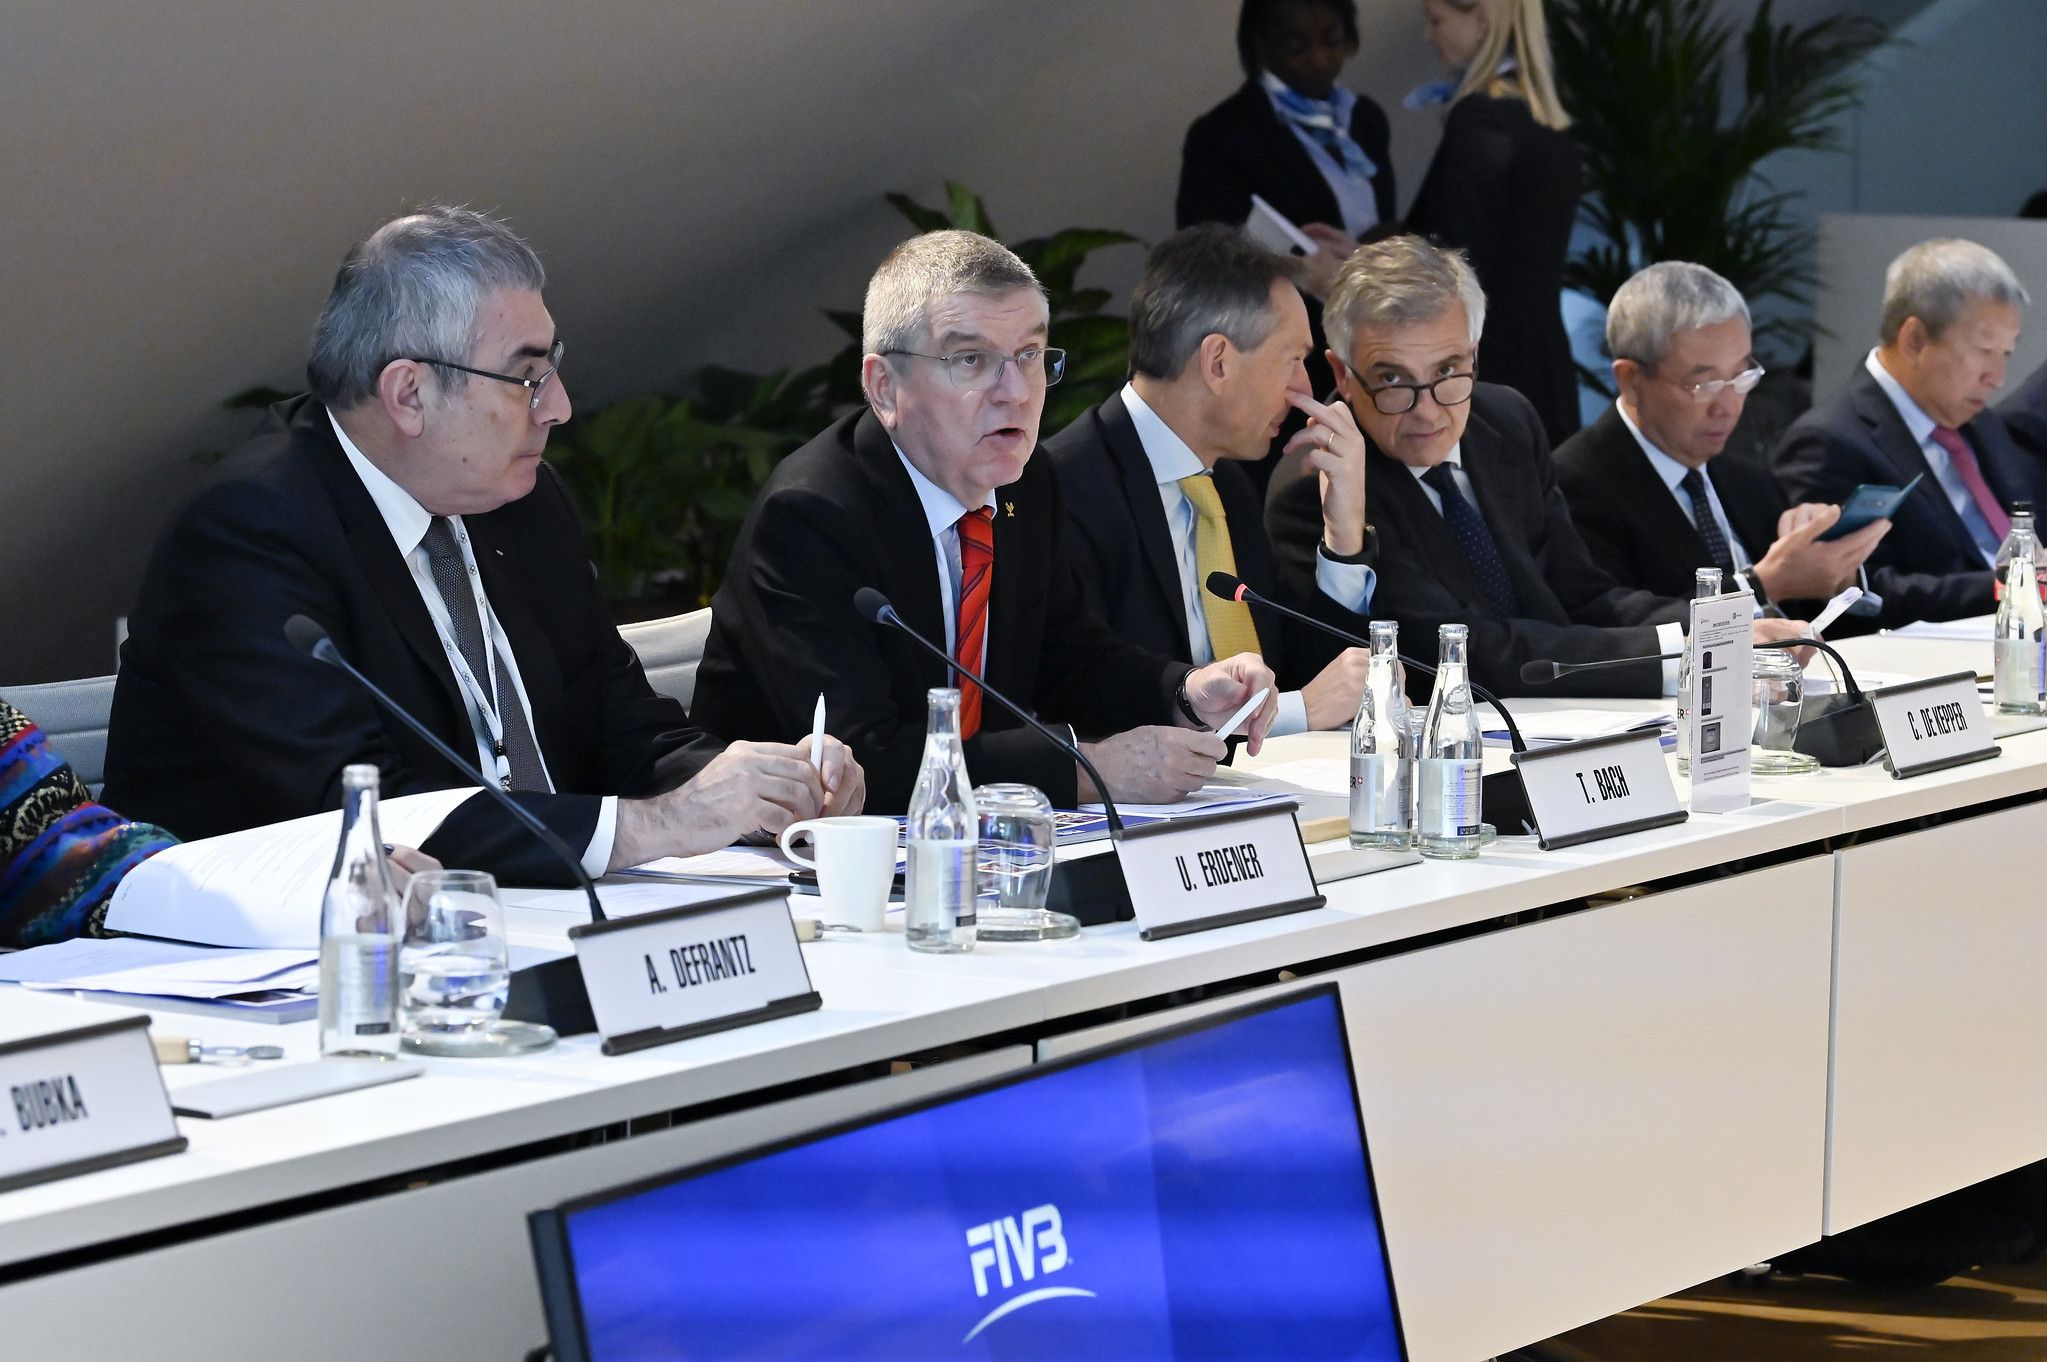 IOC President Thomas Bach praised the FIVB during the joint meeting ©FIVB